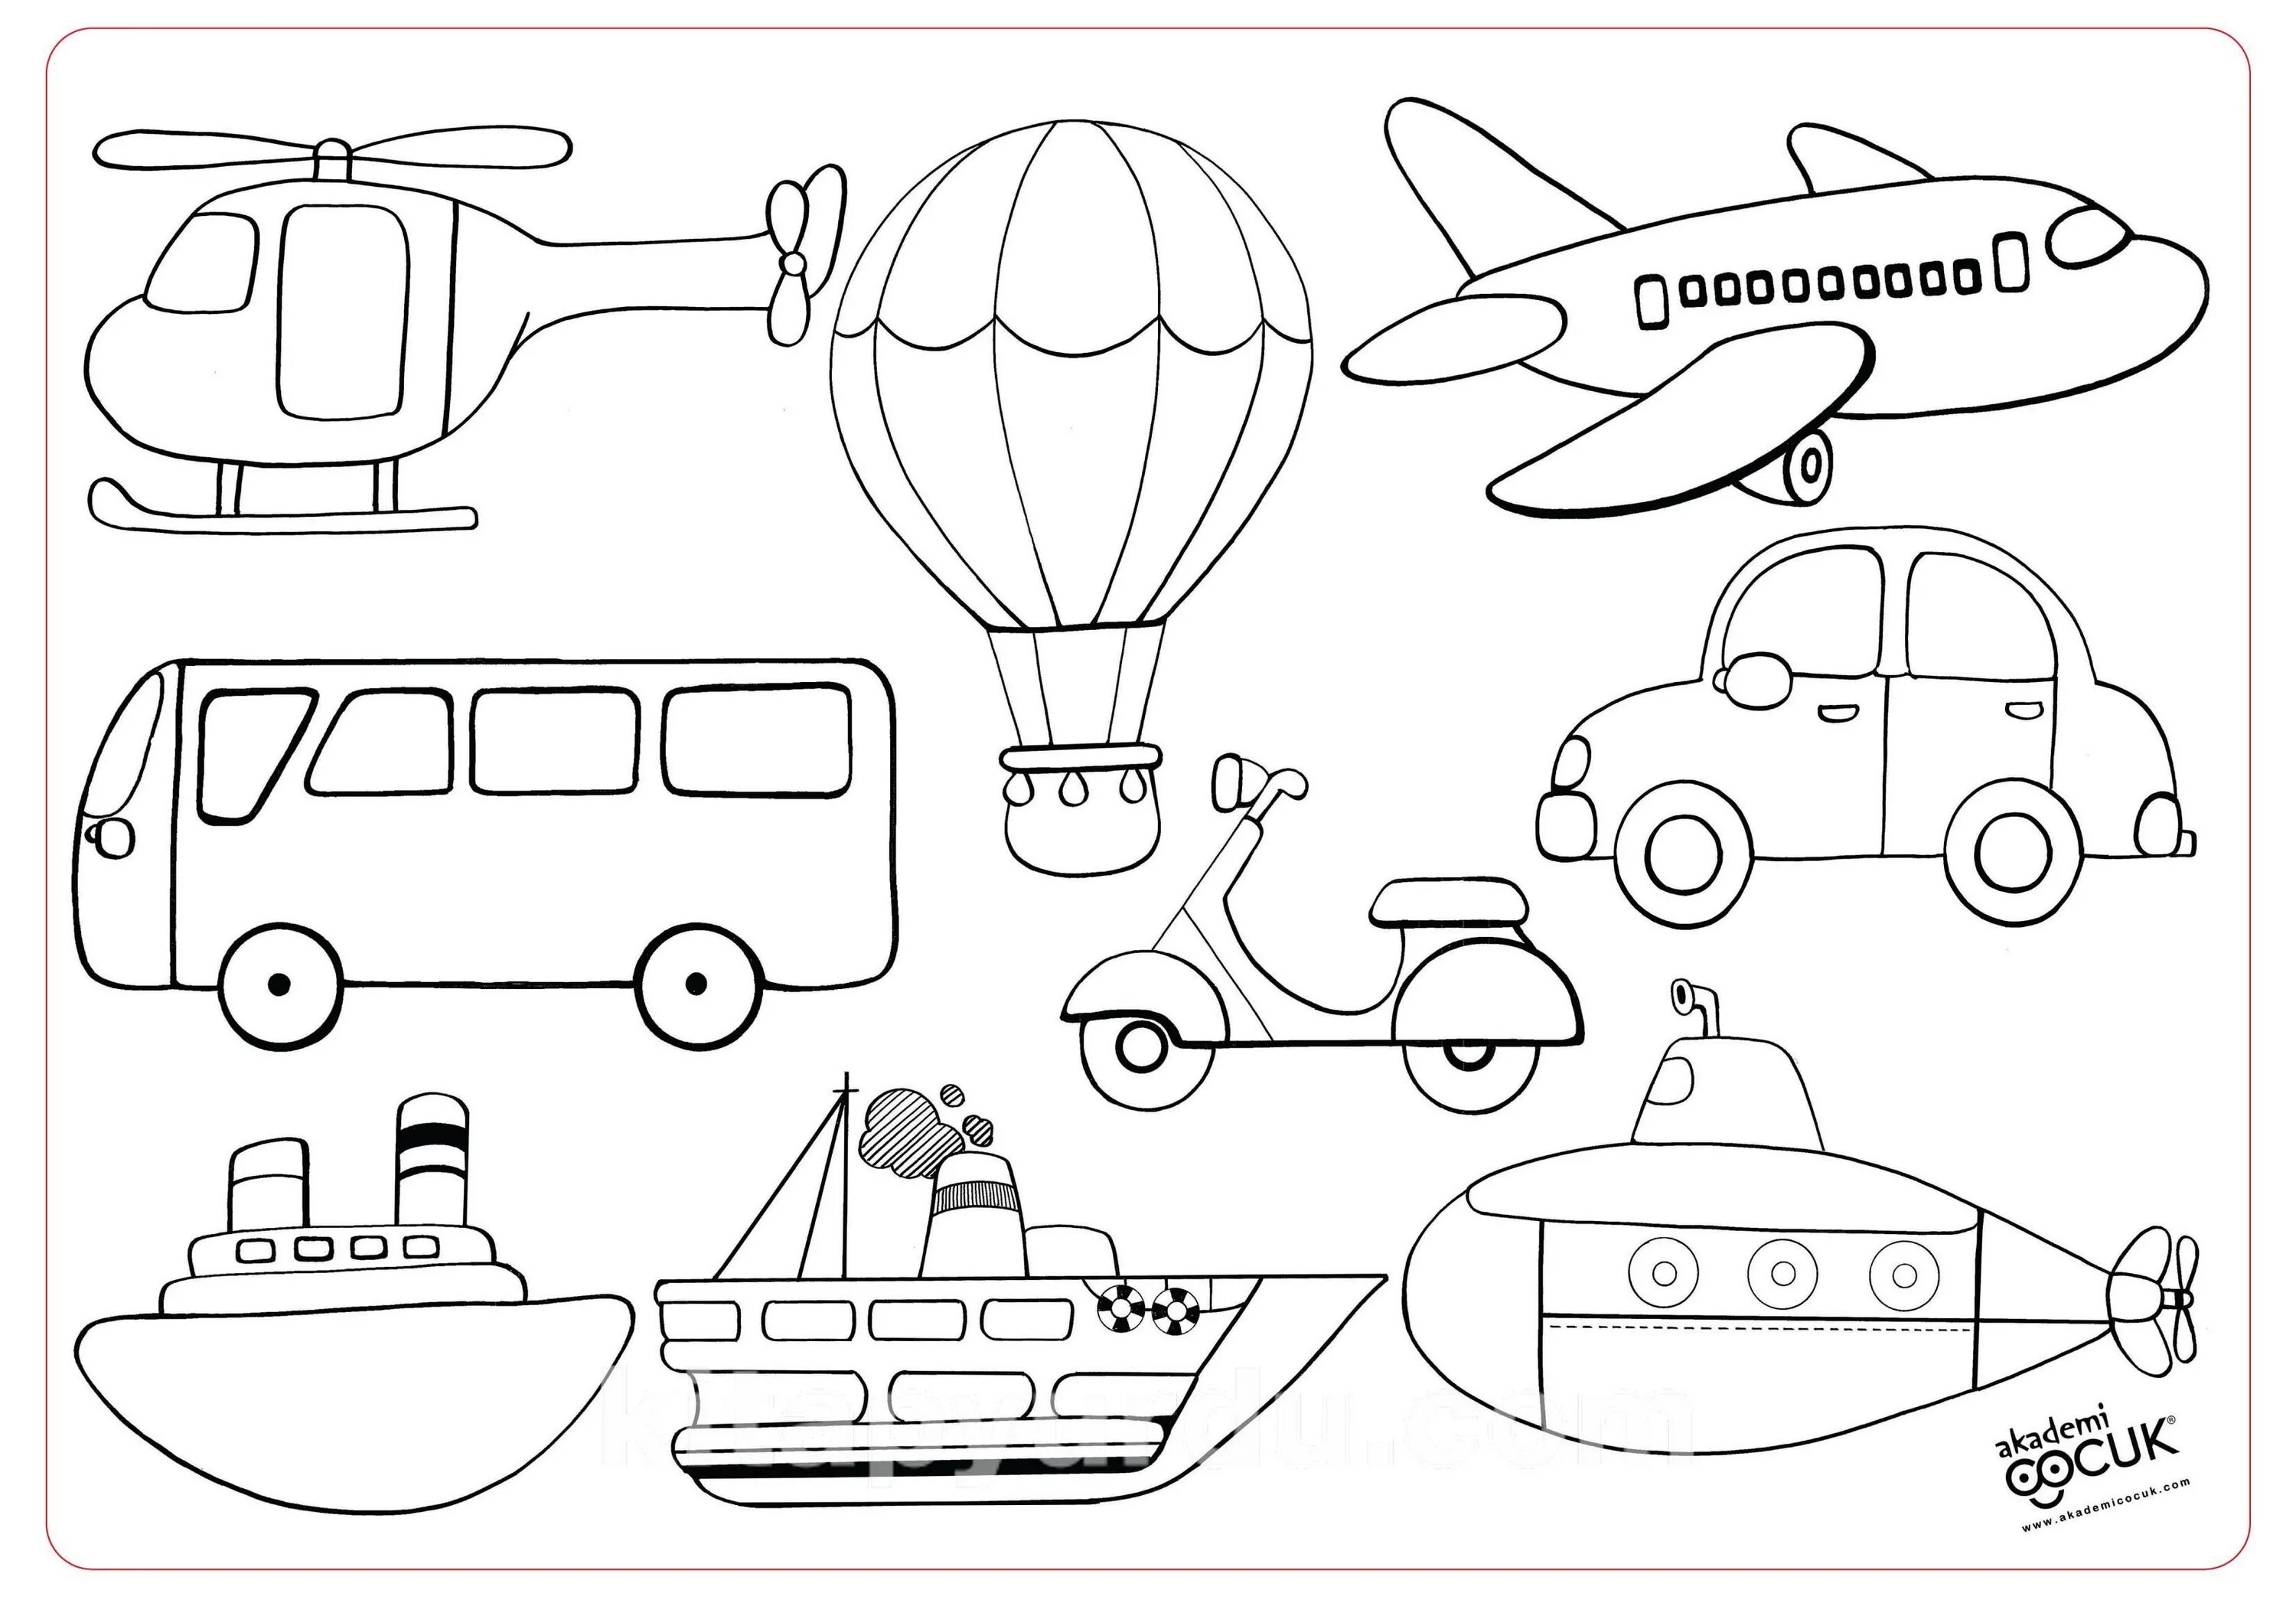 A playful tram coloring page for 6-7 year olds